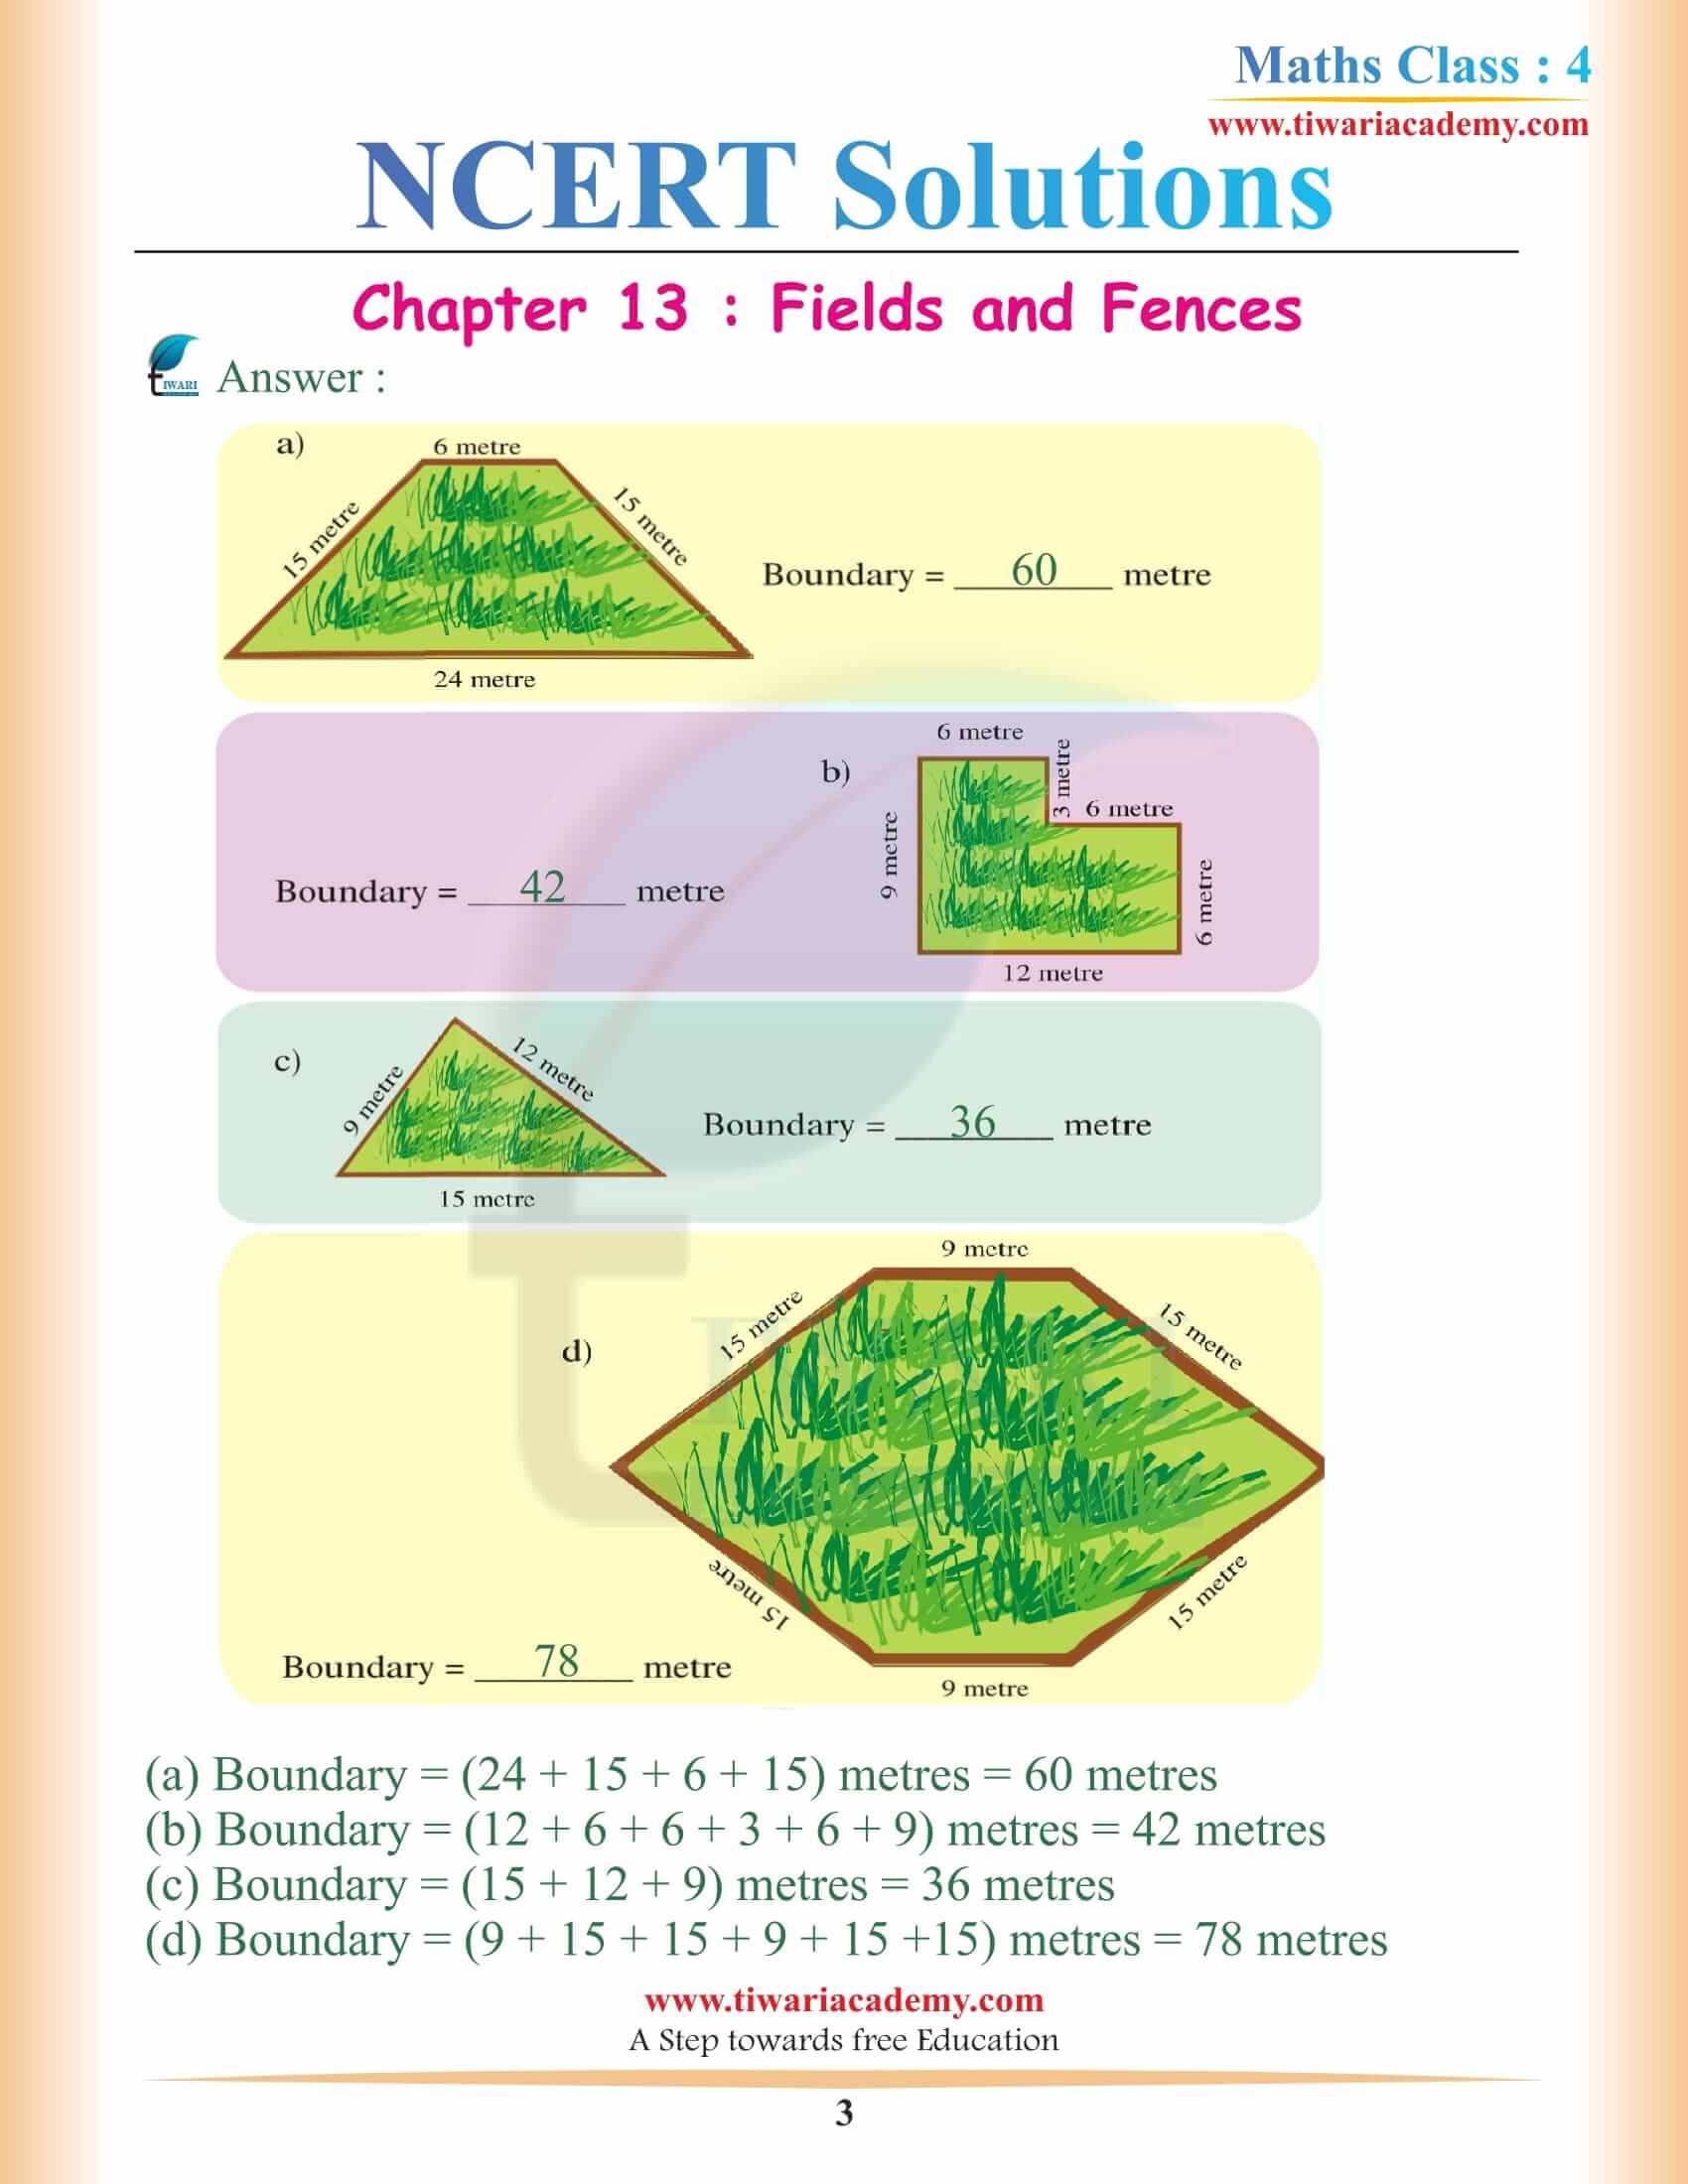 NCERT Solutions for Class 4 Maths Chapter 13 in pdf